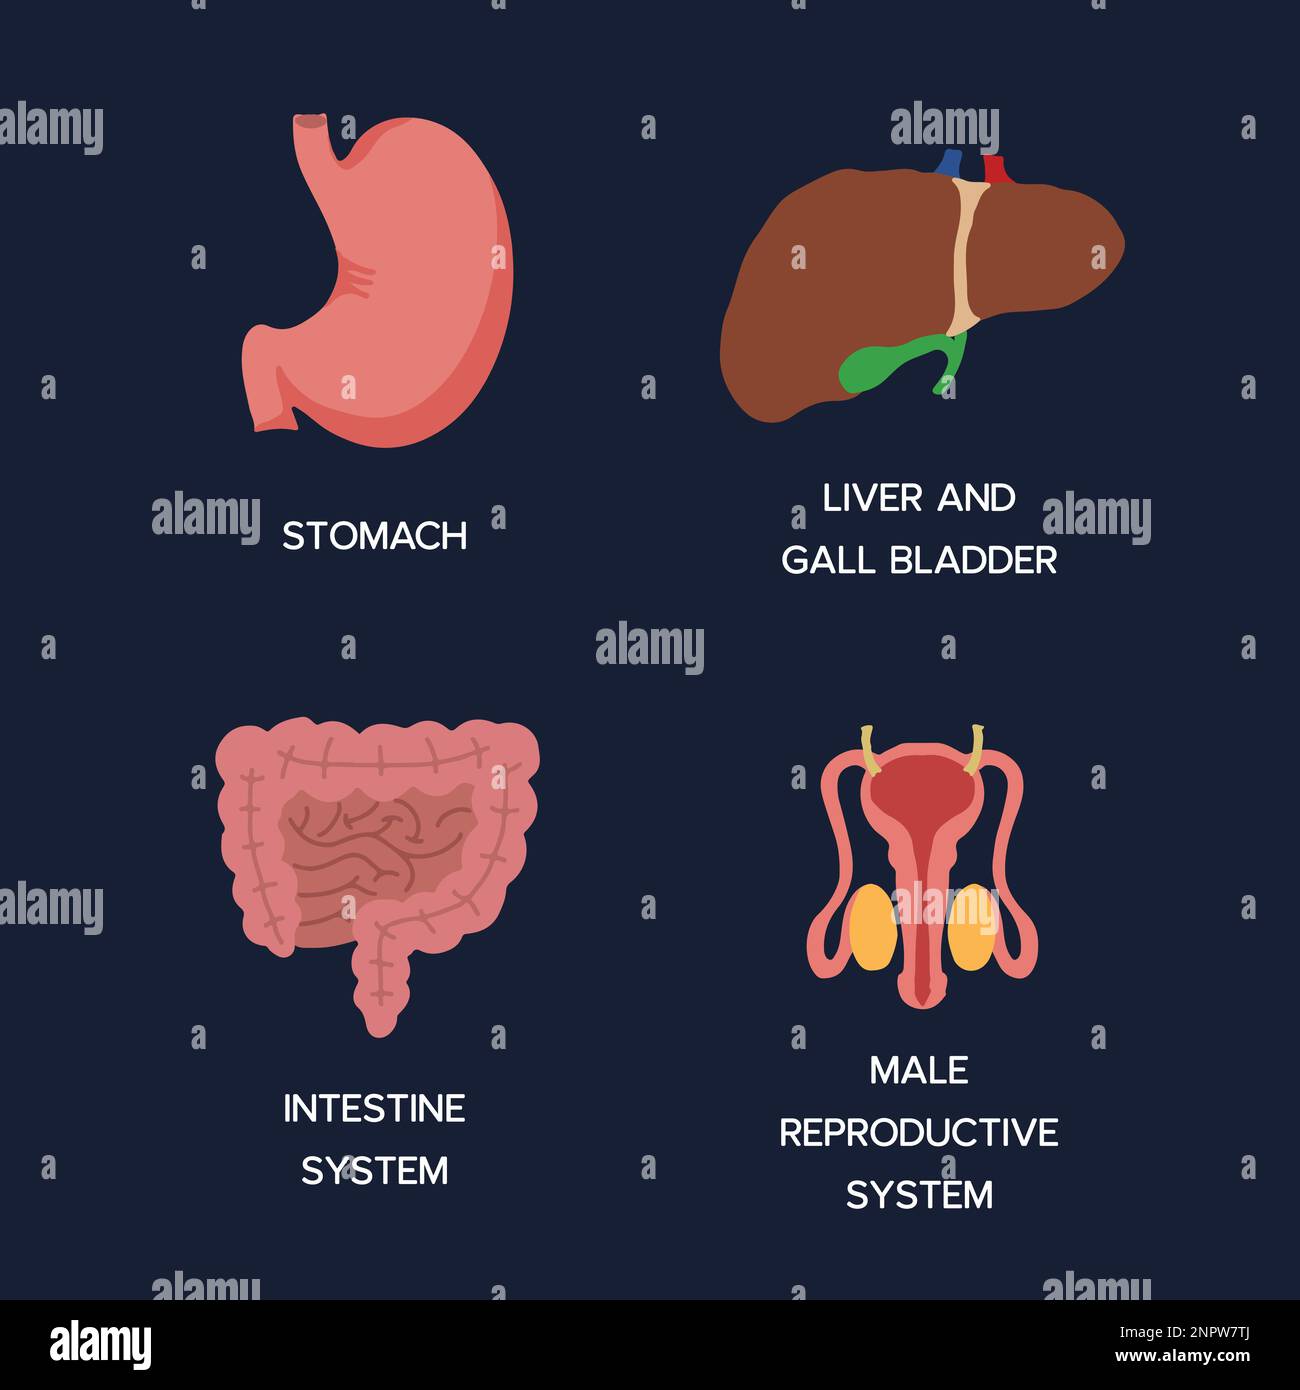 Human Internal organs, cartoon anatomy body parts, stomach with intestinal system, liver with gall bladder and male reproductive system, vector illust Stock Vector